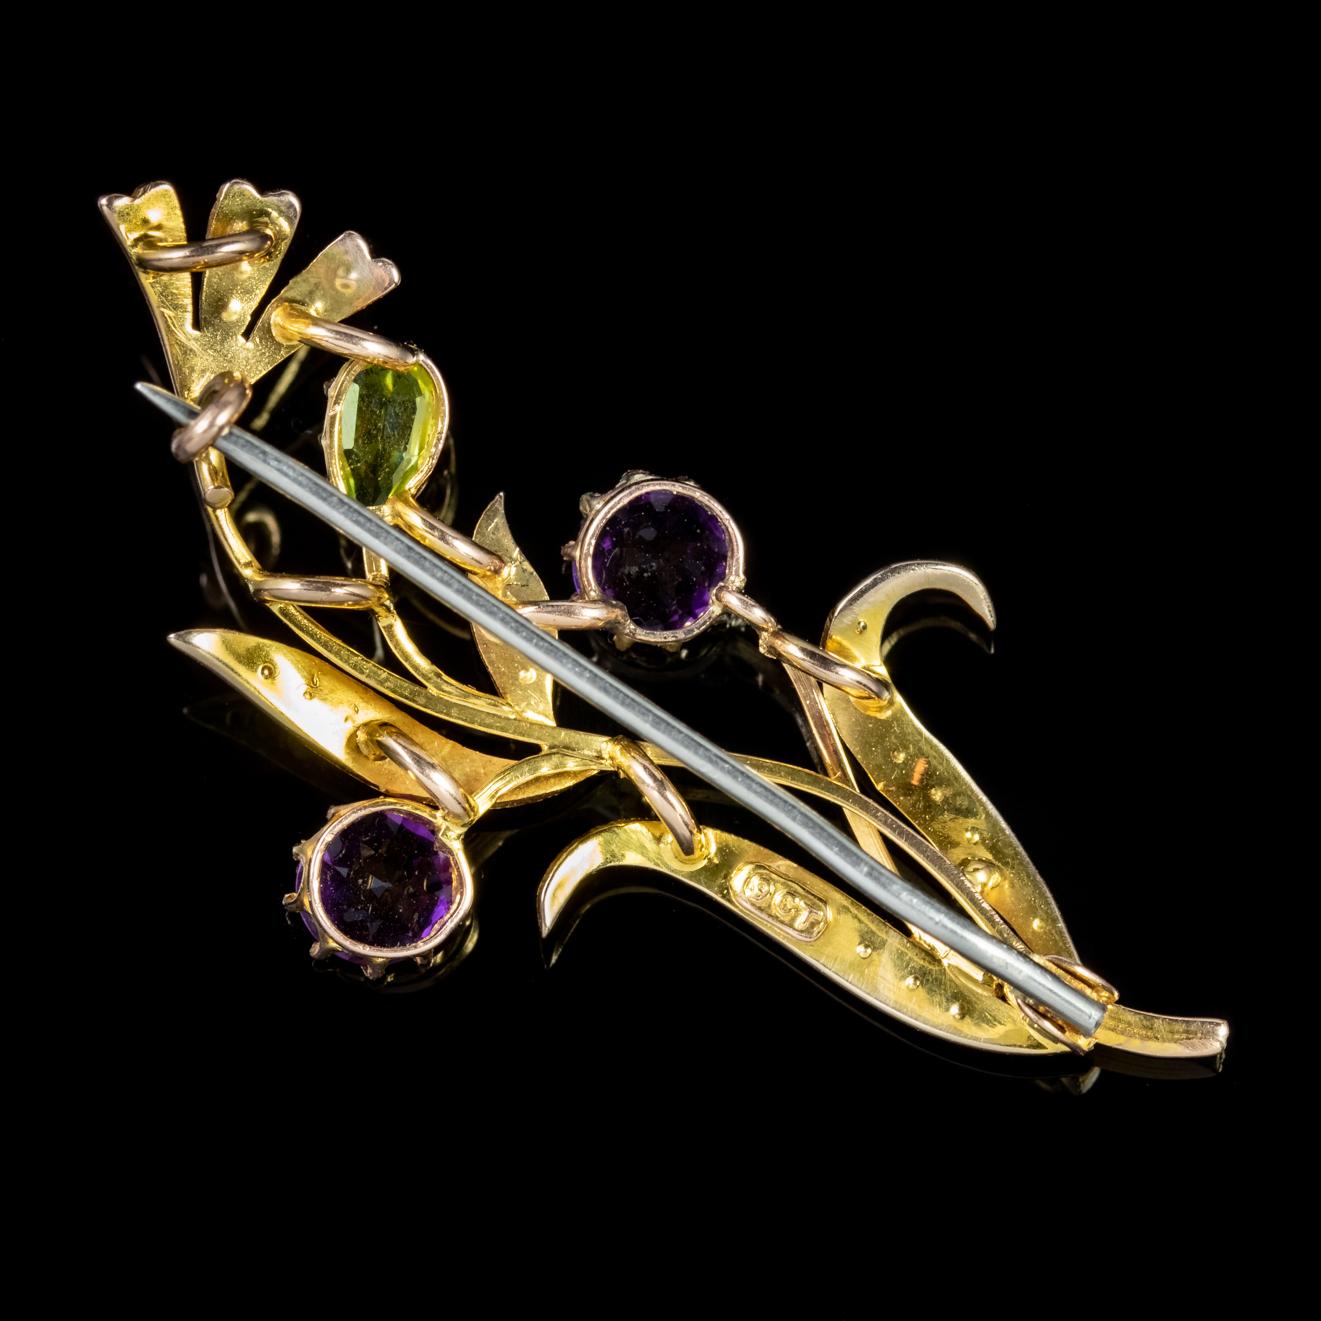 A lovely antique Suffragette brooch from the Edwardian era depicting wonderful flowing leaves and flowers decorated with Amethysts, Peridots and Pearls. 

Suffragettes liked to be depicted as feminine, their jewellery popularly consisted of Violet,